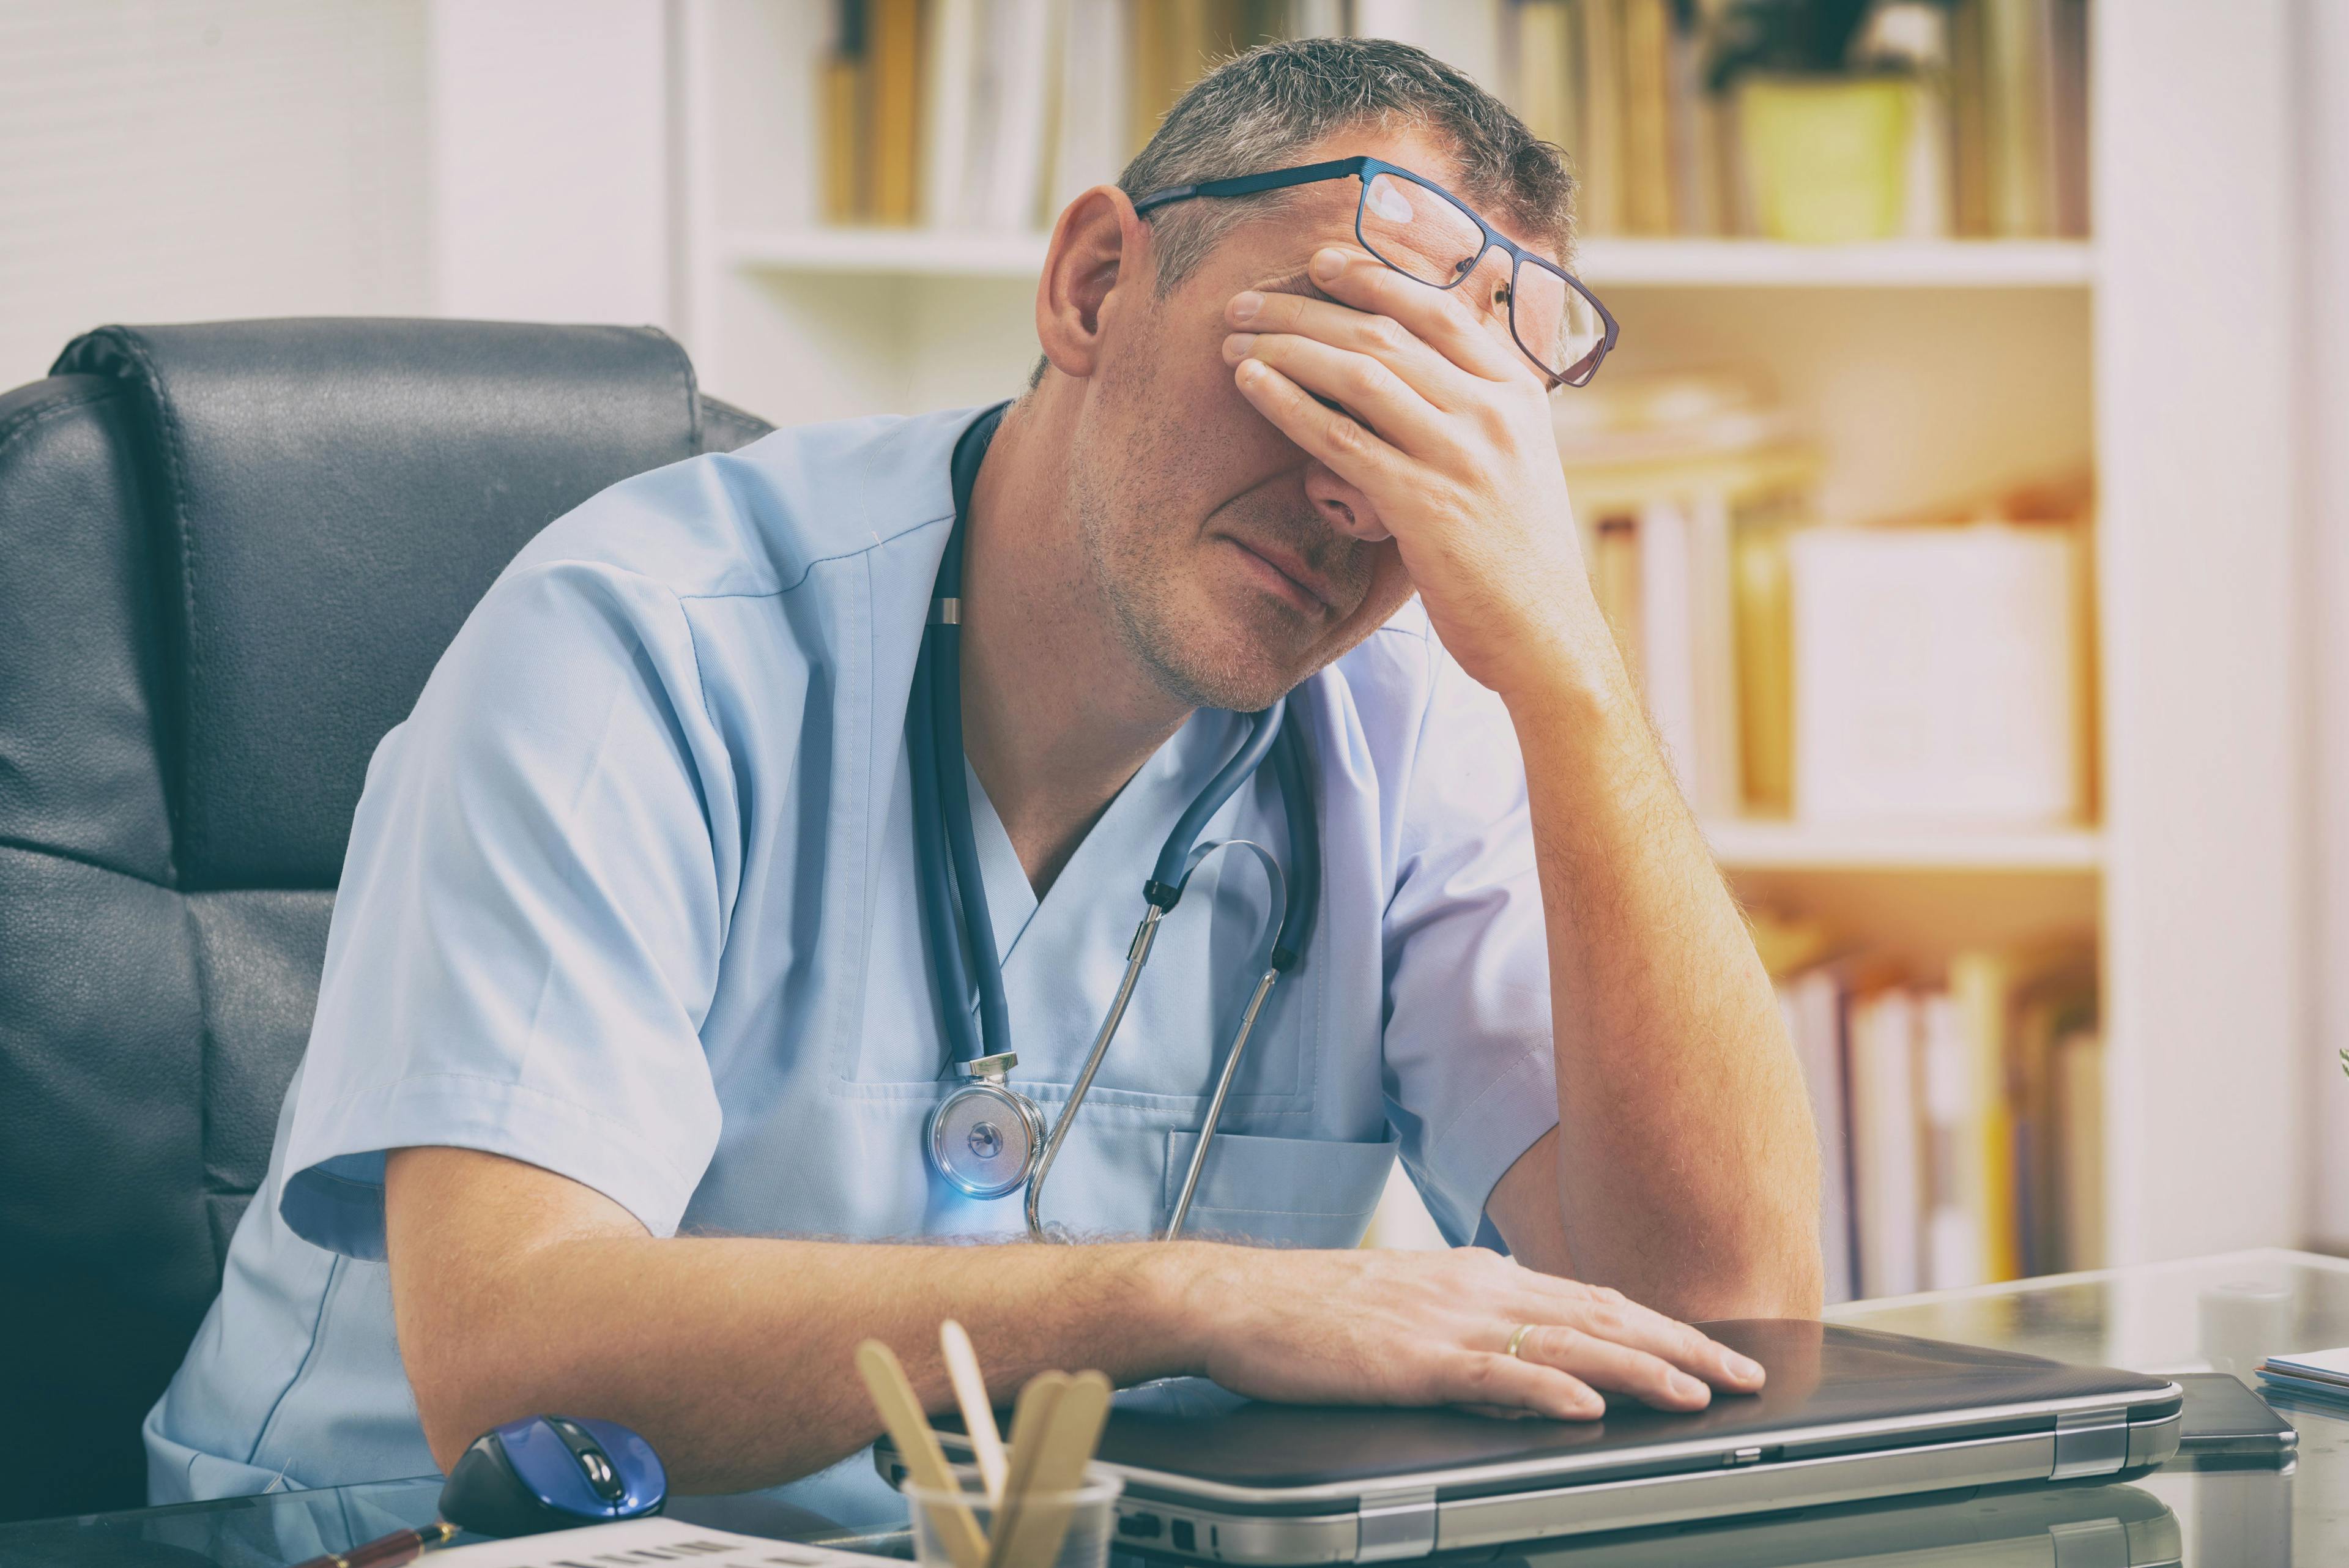 EHR burnout indicators greater than anticipated more than a decade ago